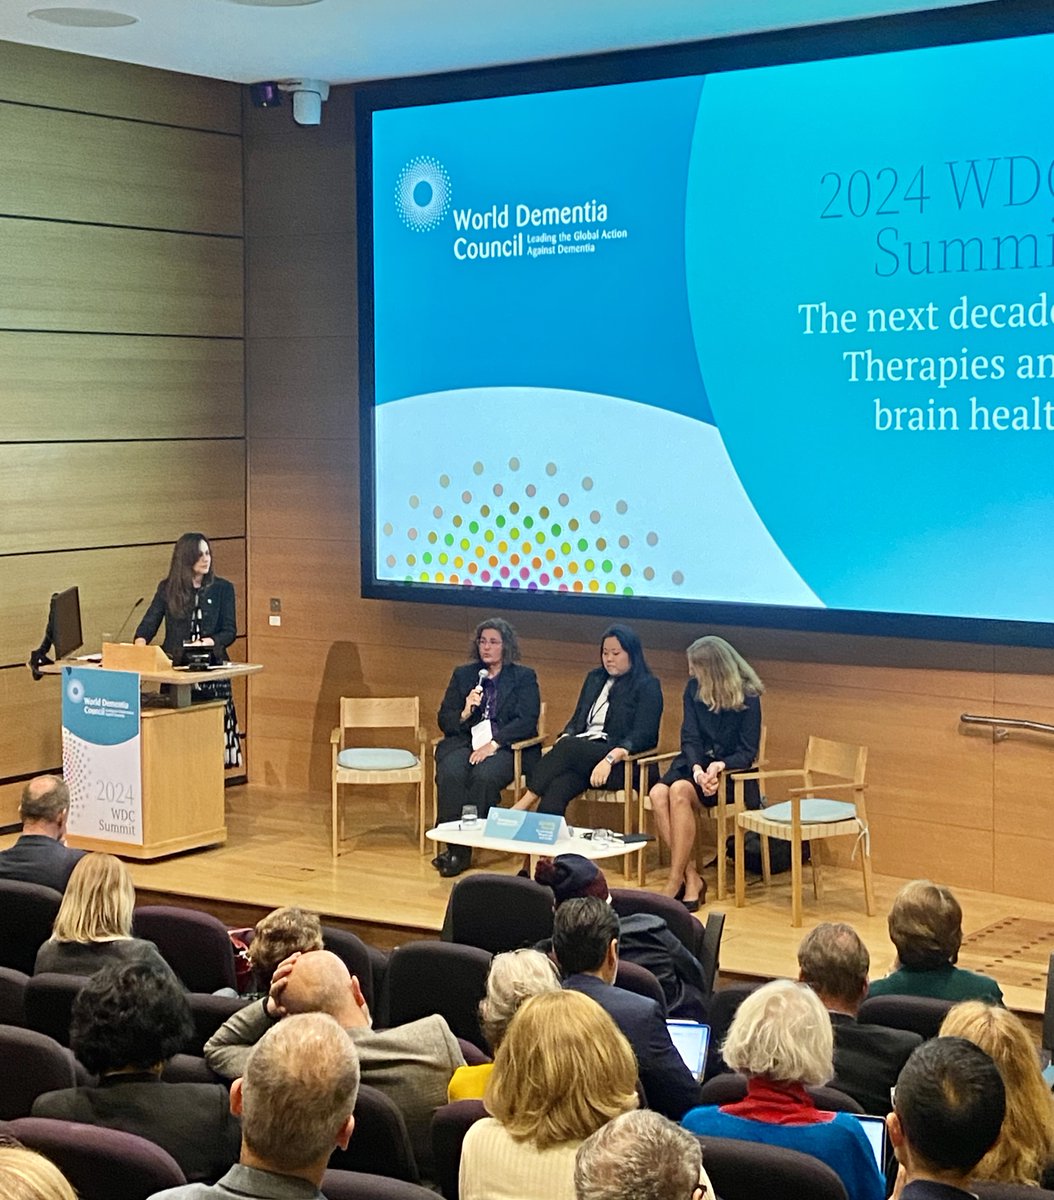 “We need to find the tipping point for dementia. In smoking they reached it. What is the tipping point to motivate a sustained lifestyle change for brain health?” — Franca Gatto during today’s session on maintaining brain health.